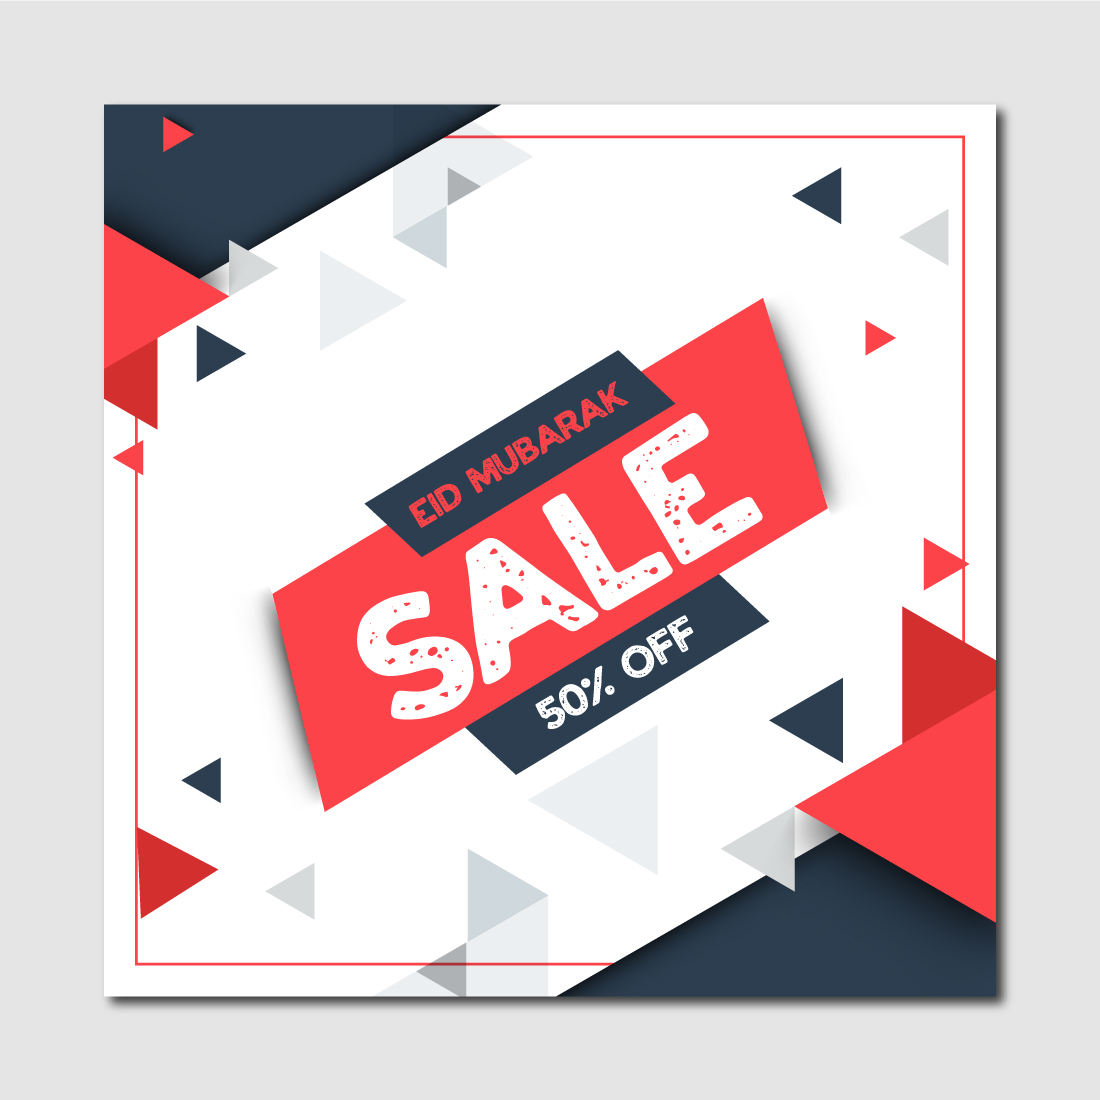 Eid mubarak creative sale and discount banner or tag design cover image.